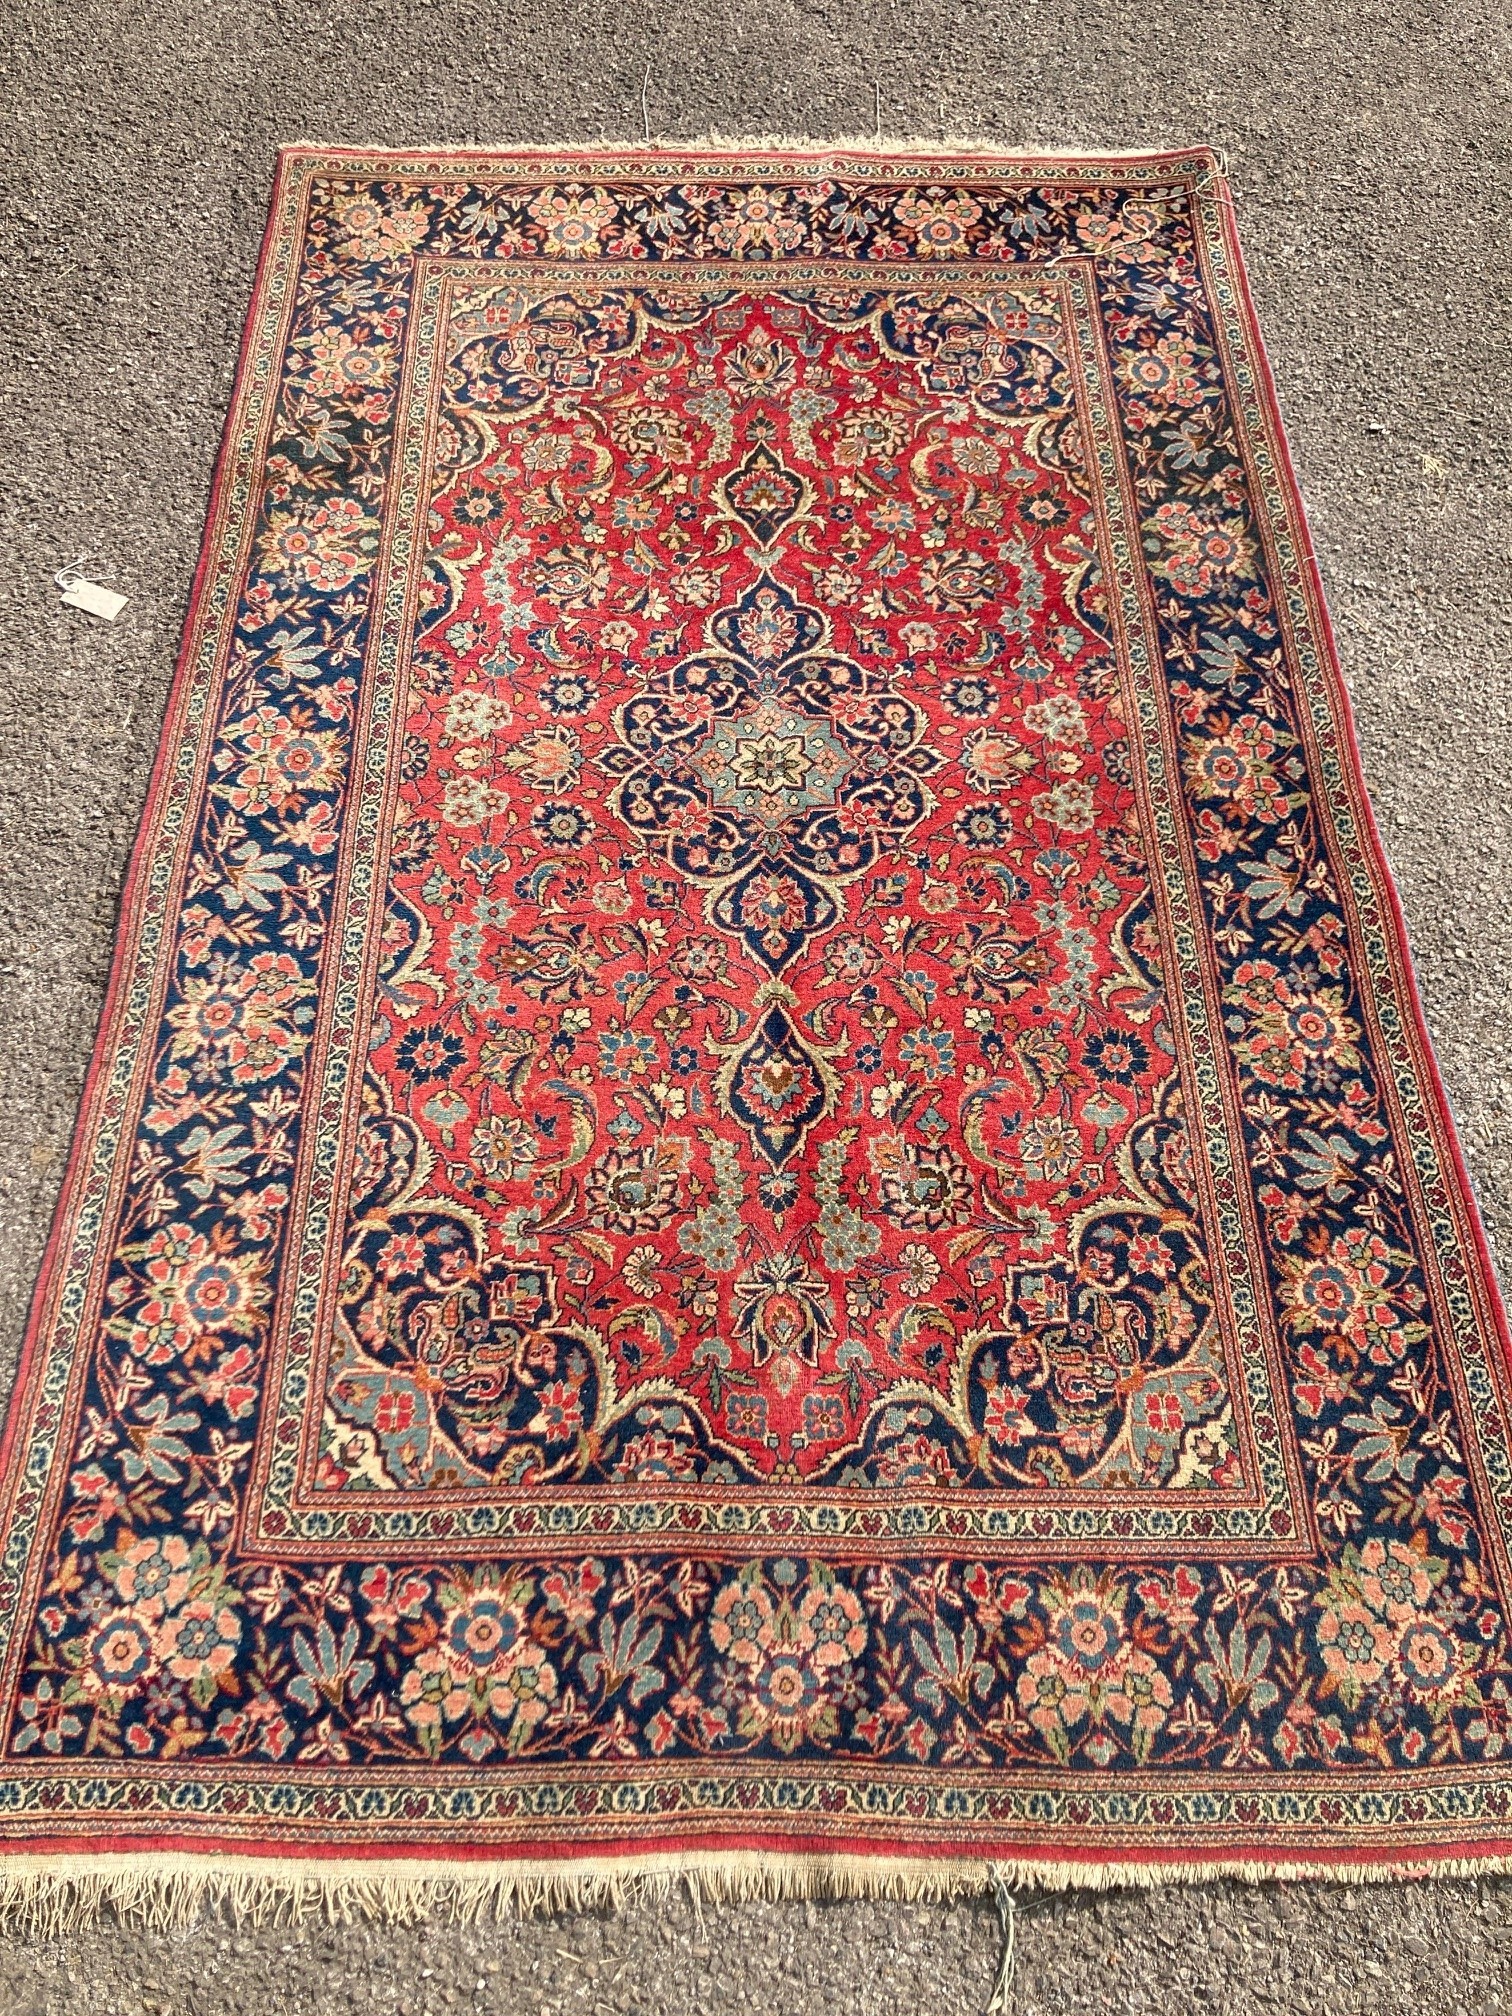 A Kashan red ground rug, with all-over stylised floral motifs                                                                                                                                                               